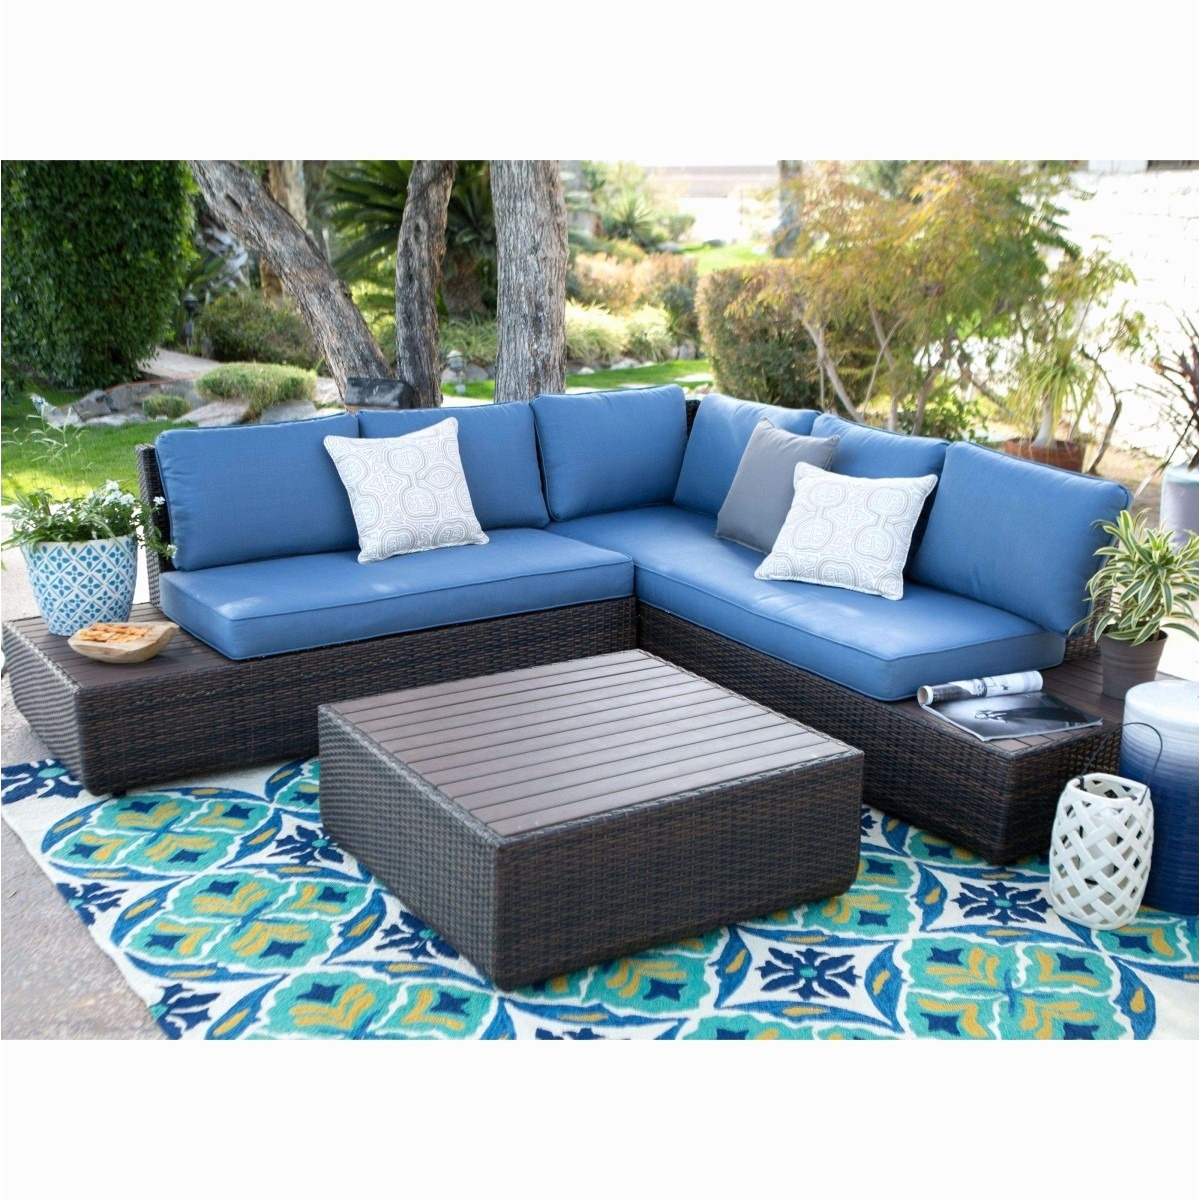 Outdoor Coffee Table Amazing Wicker Outdoor Sofa 0d Patio Chairs As Classic Living Room Accent 